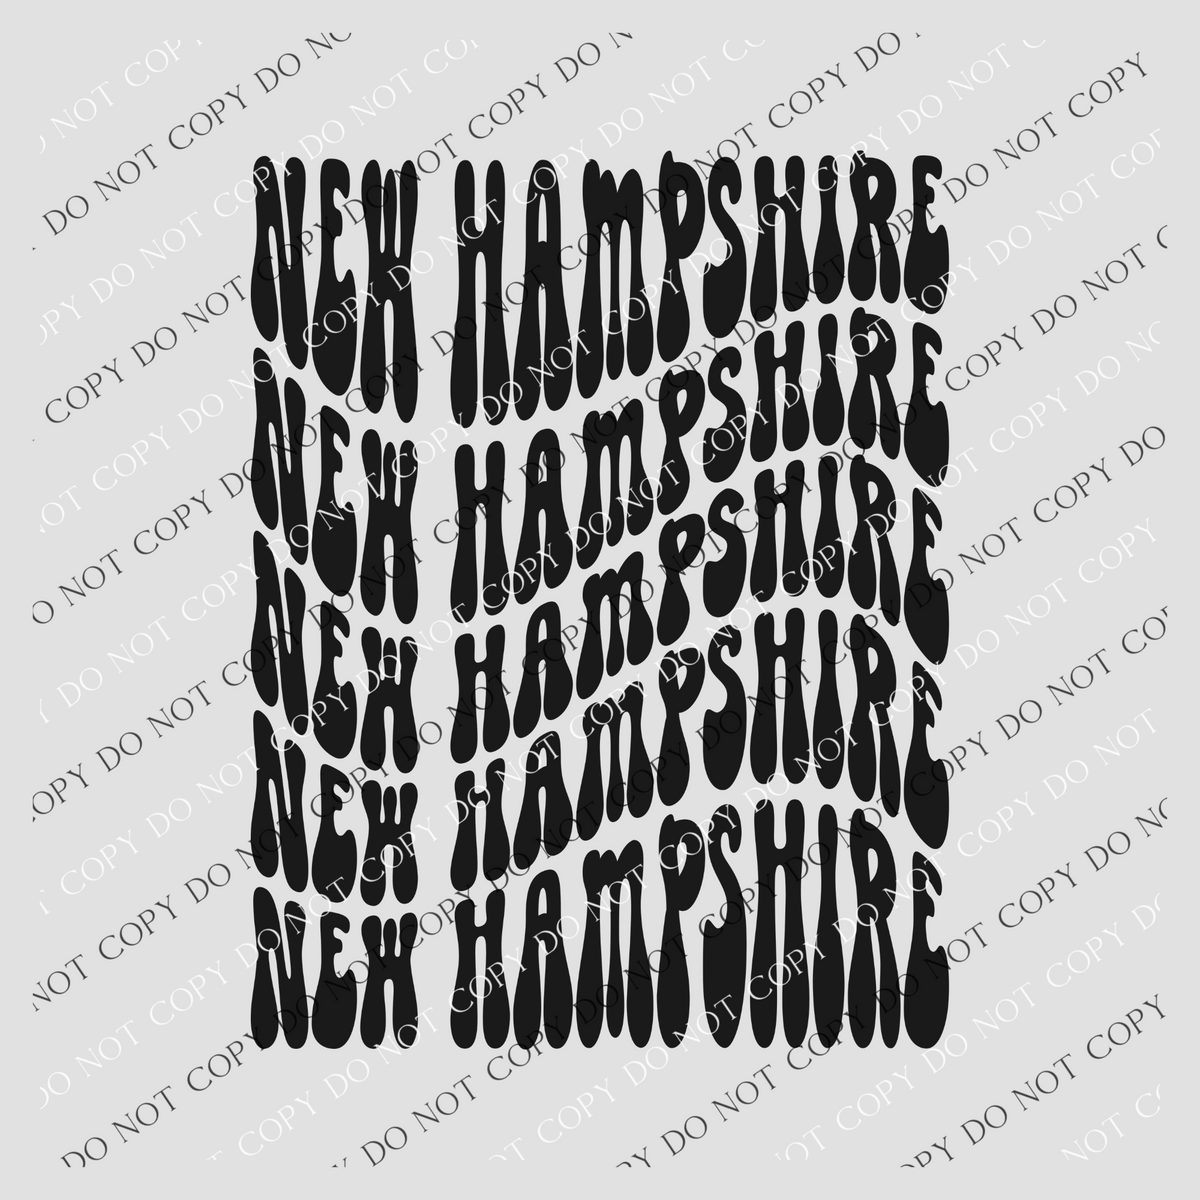 New Hampshire Groovy Wave Stacked Digital Design PNG, Both Black and White Designs Incuded